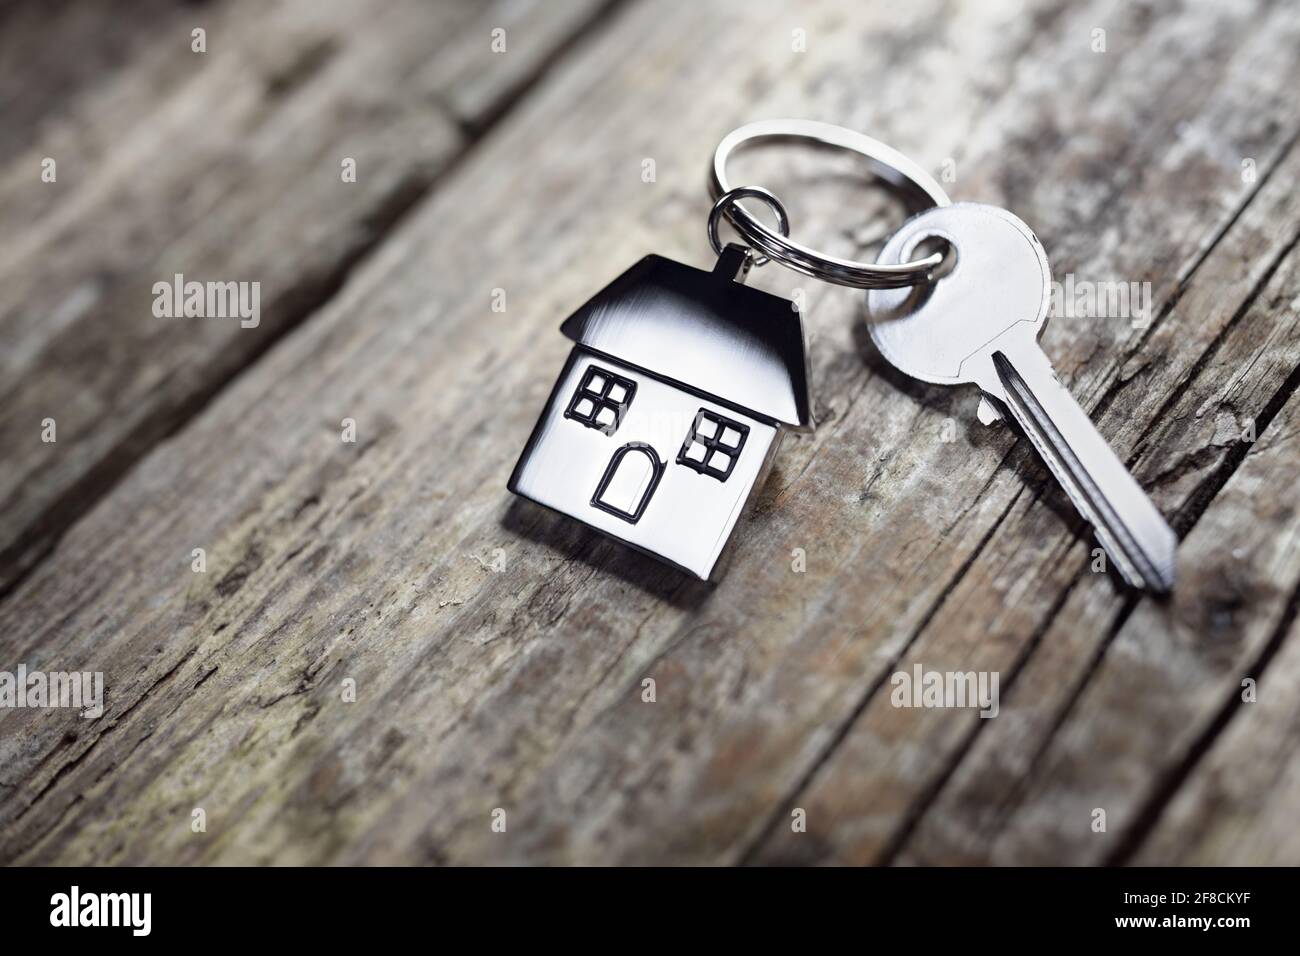 House key on a house shaped keychain resting on wooden floorboards concept for real estate, moving home or renting property Stock Photo